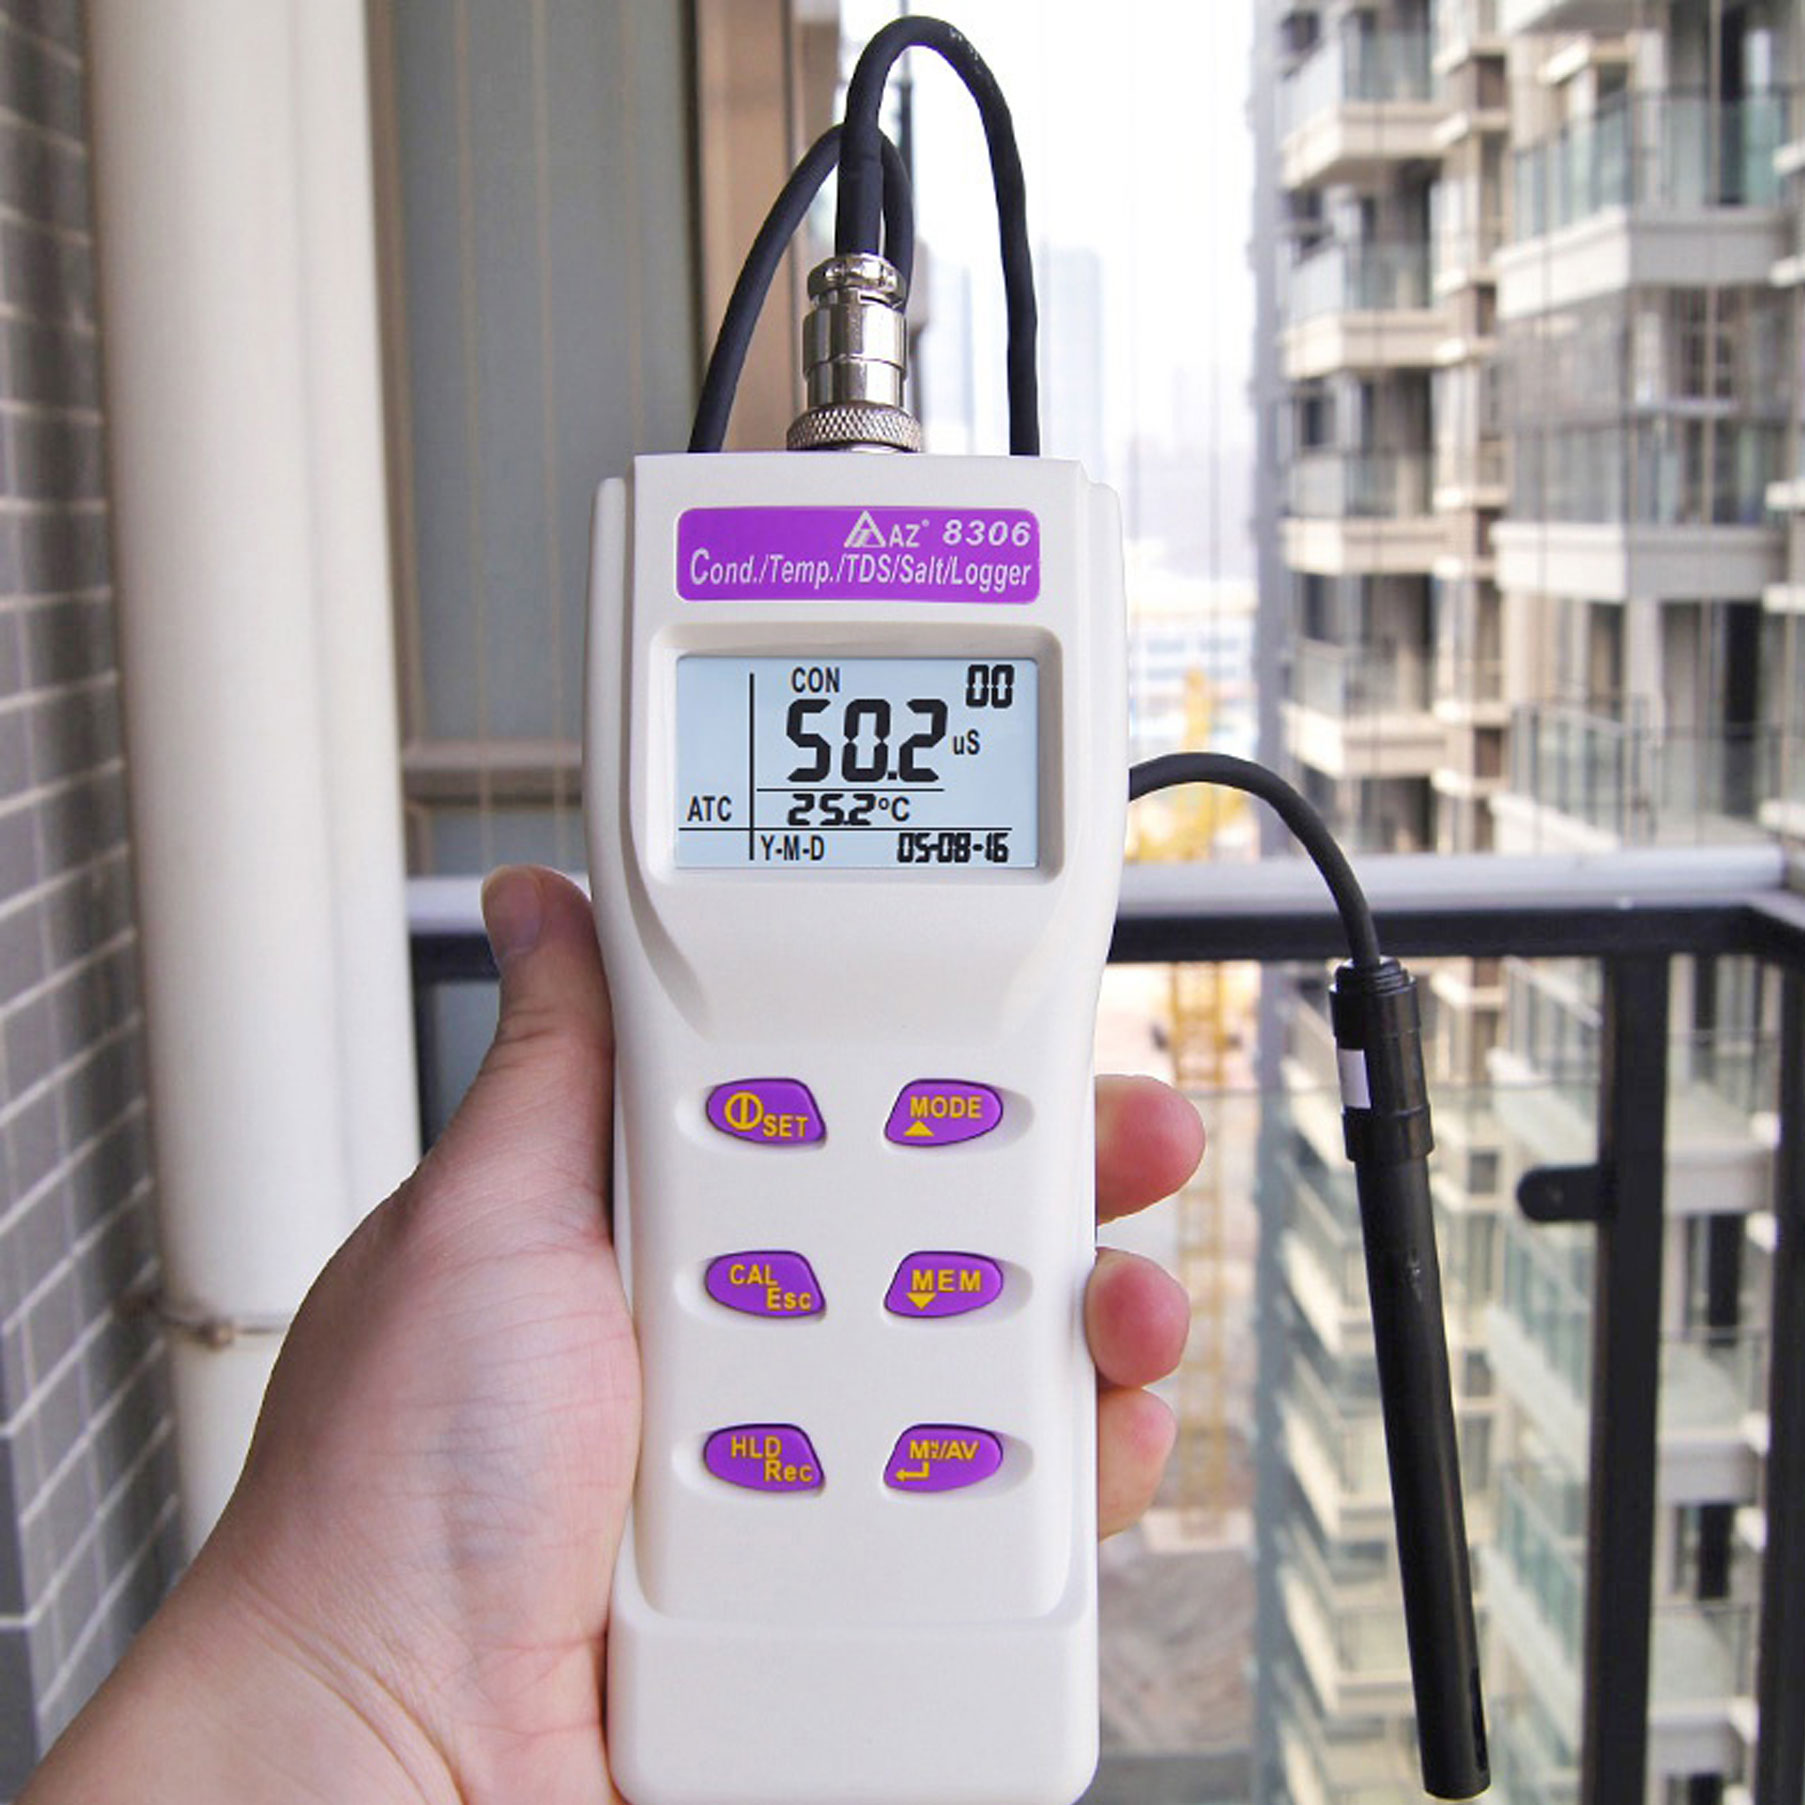 

AZ8306 Portable Conductivity Meter Multi Conductivity / TDS (Total Dissolved Solid) / Salinity and Temperature